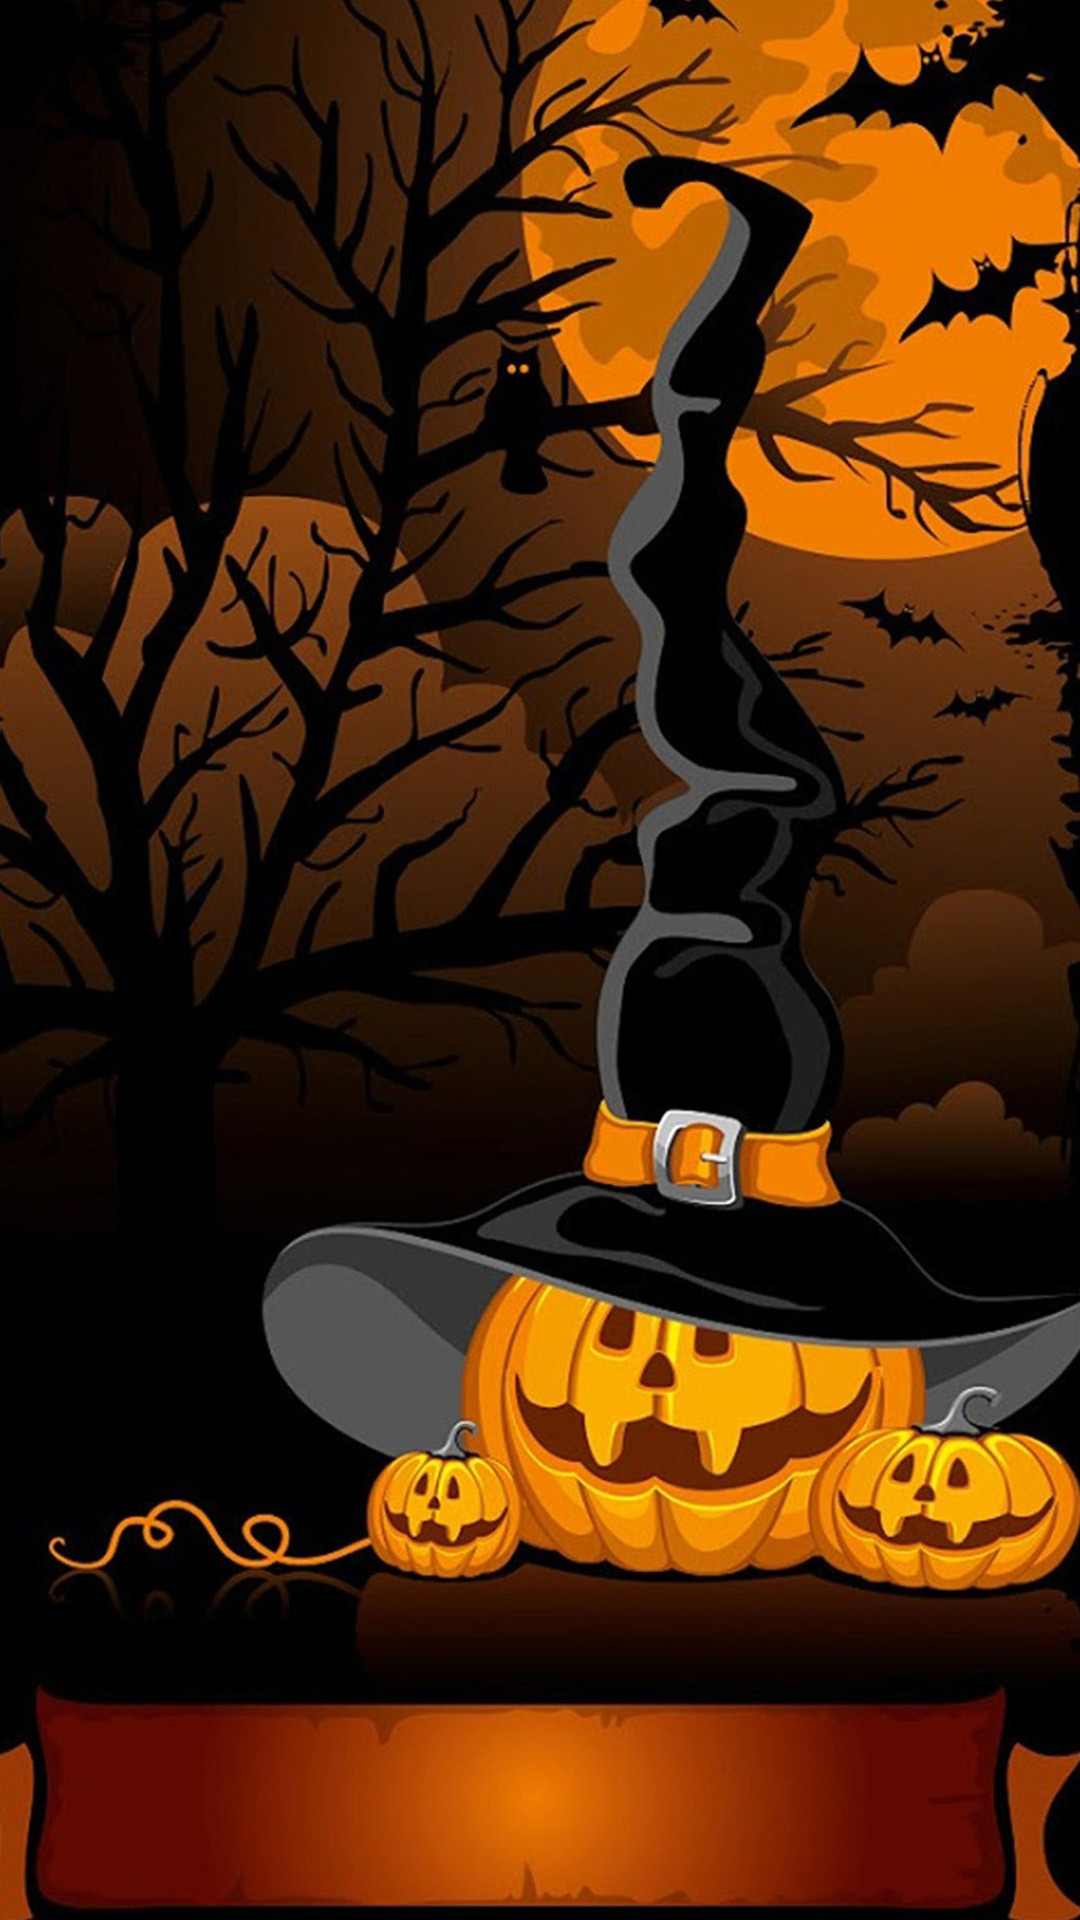 1080x1920 Scary Halloween Witch Wallpaper Source Â· Halloween Pumpkins Witch Hat Sony  Xperia Z2 Wallpapers Xperia Z2